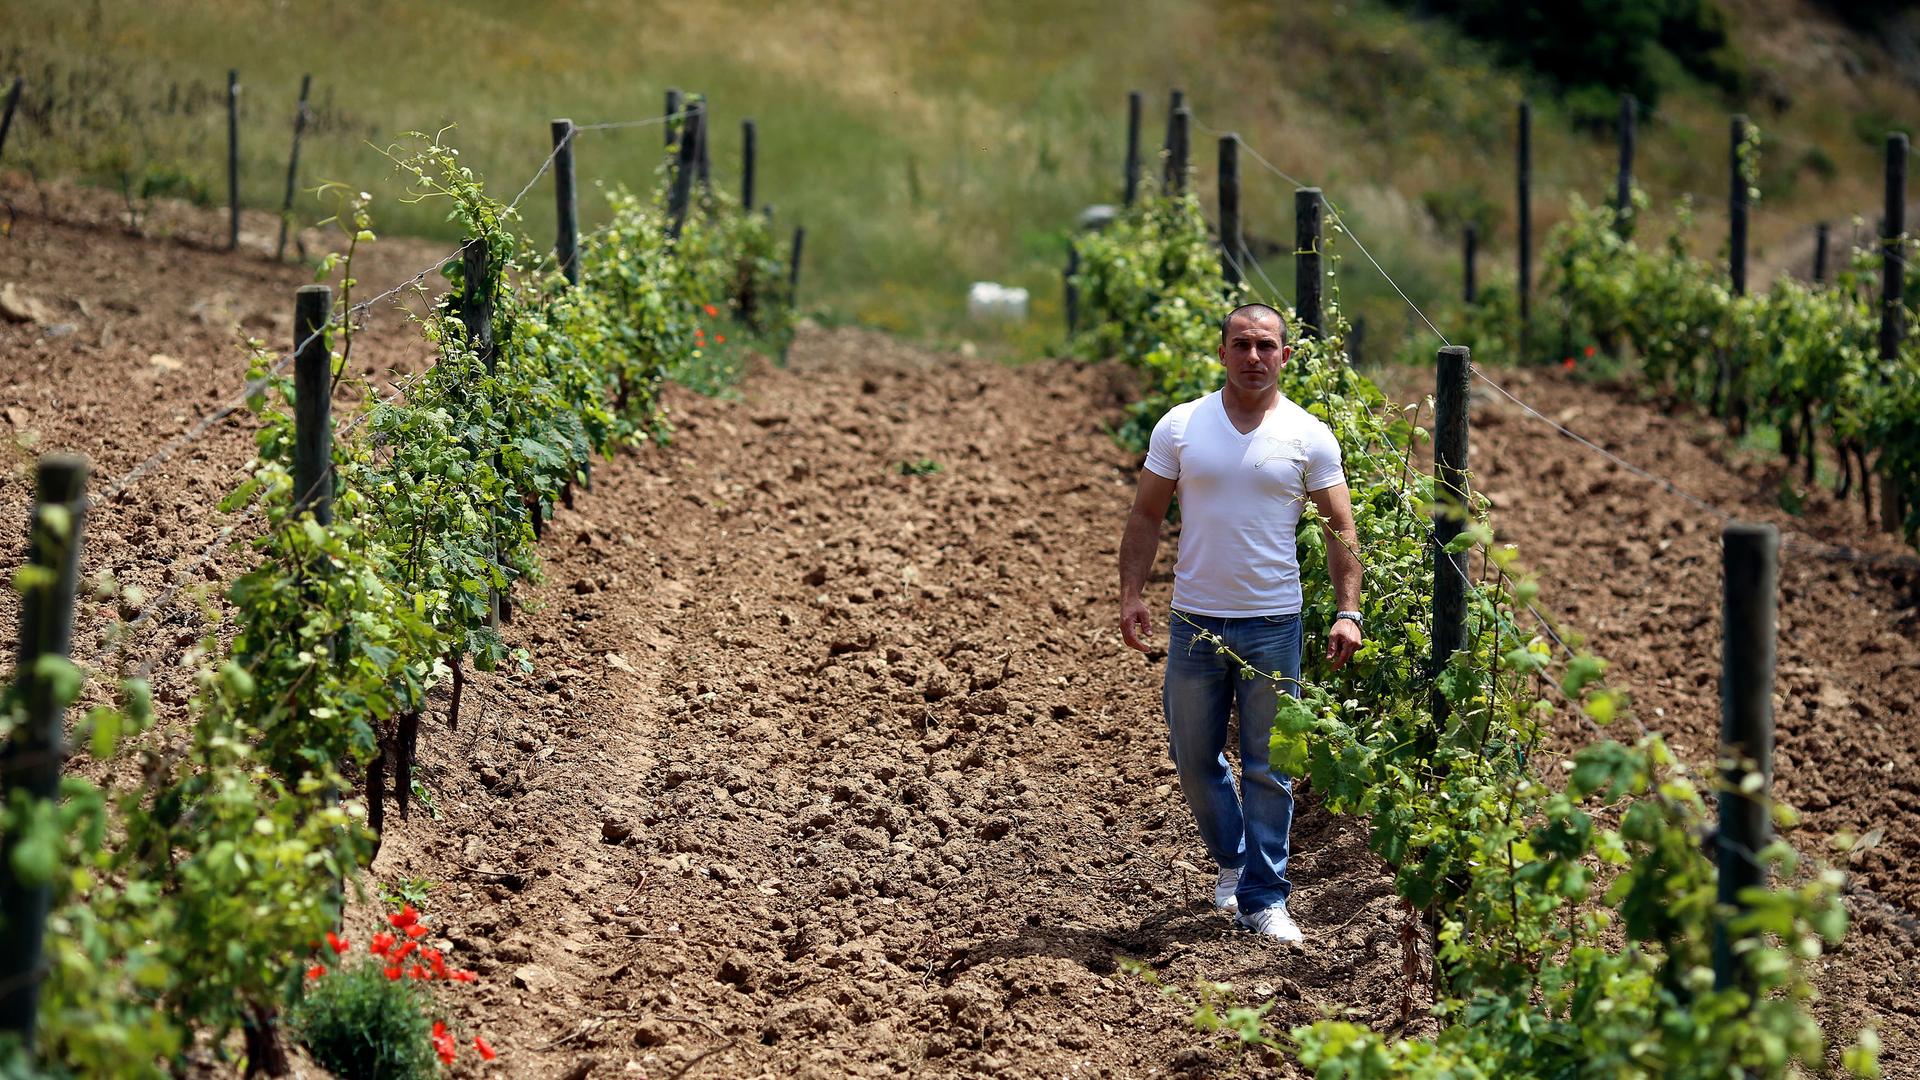 Francesco Papa, a prisoner on the penal colony, walks between rows of grapevines.